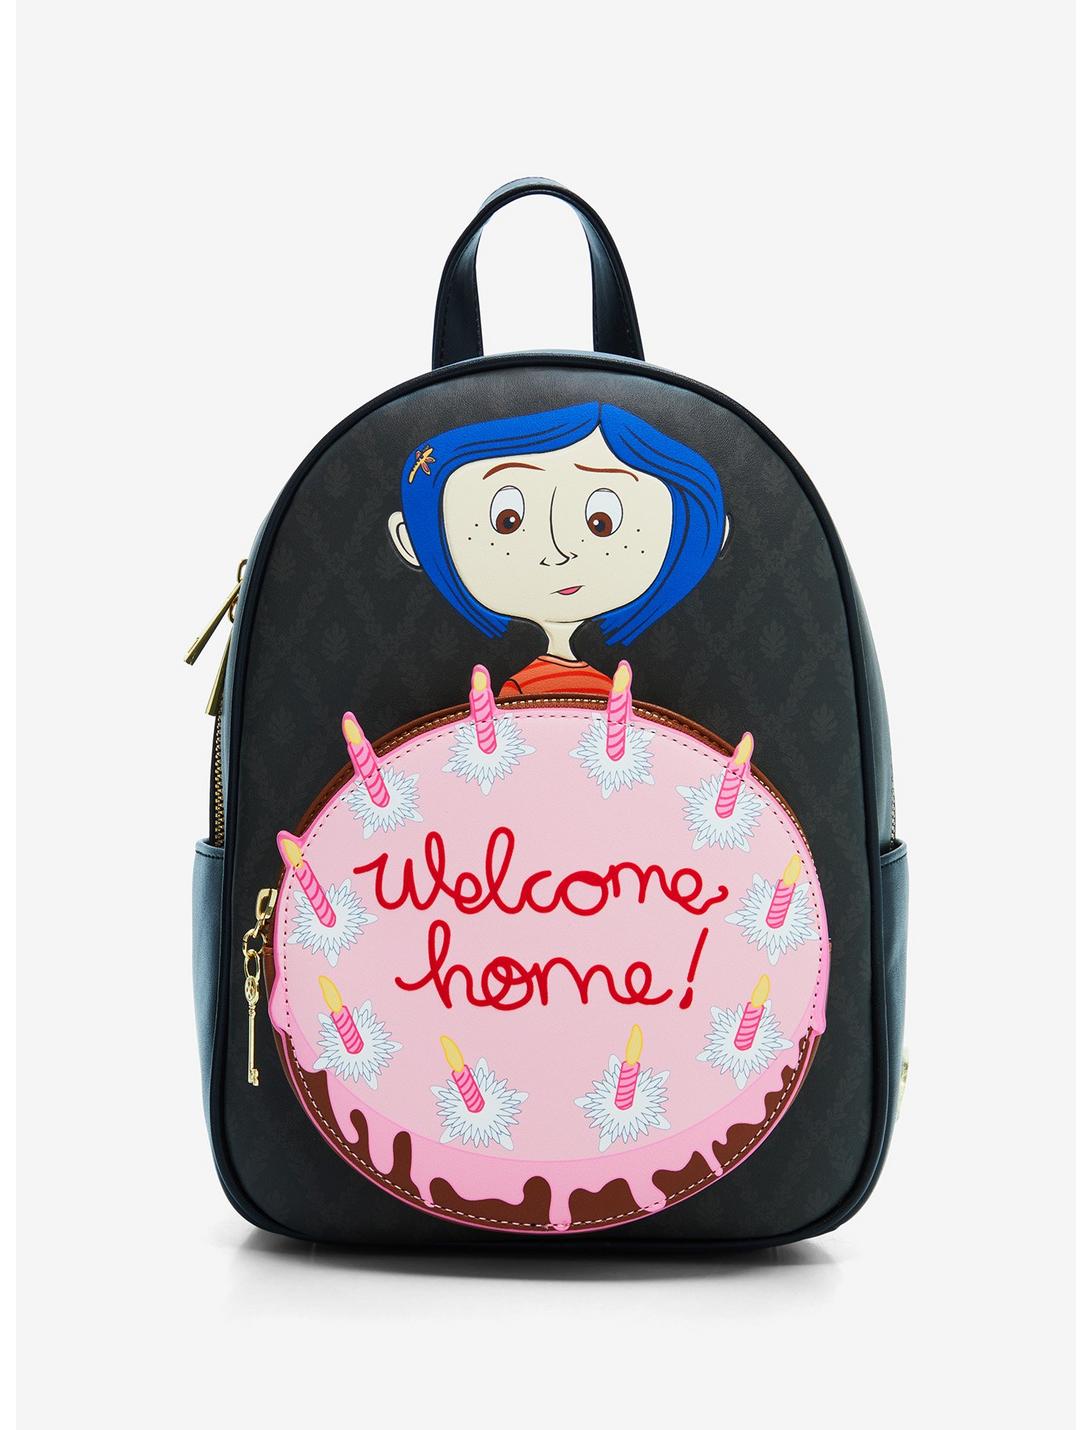 Coraline Cake Mini Backpack With Chase Variant, , hi-res